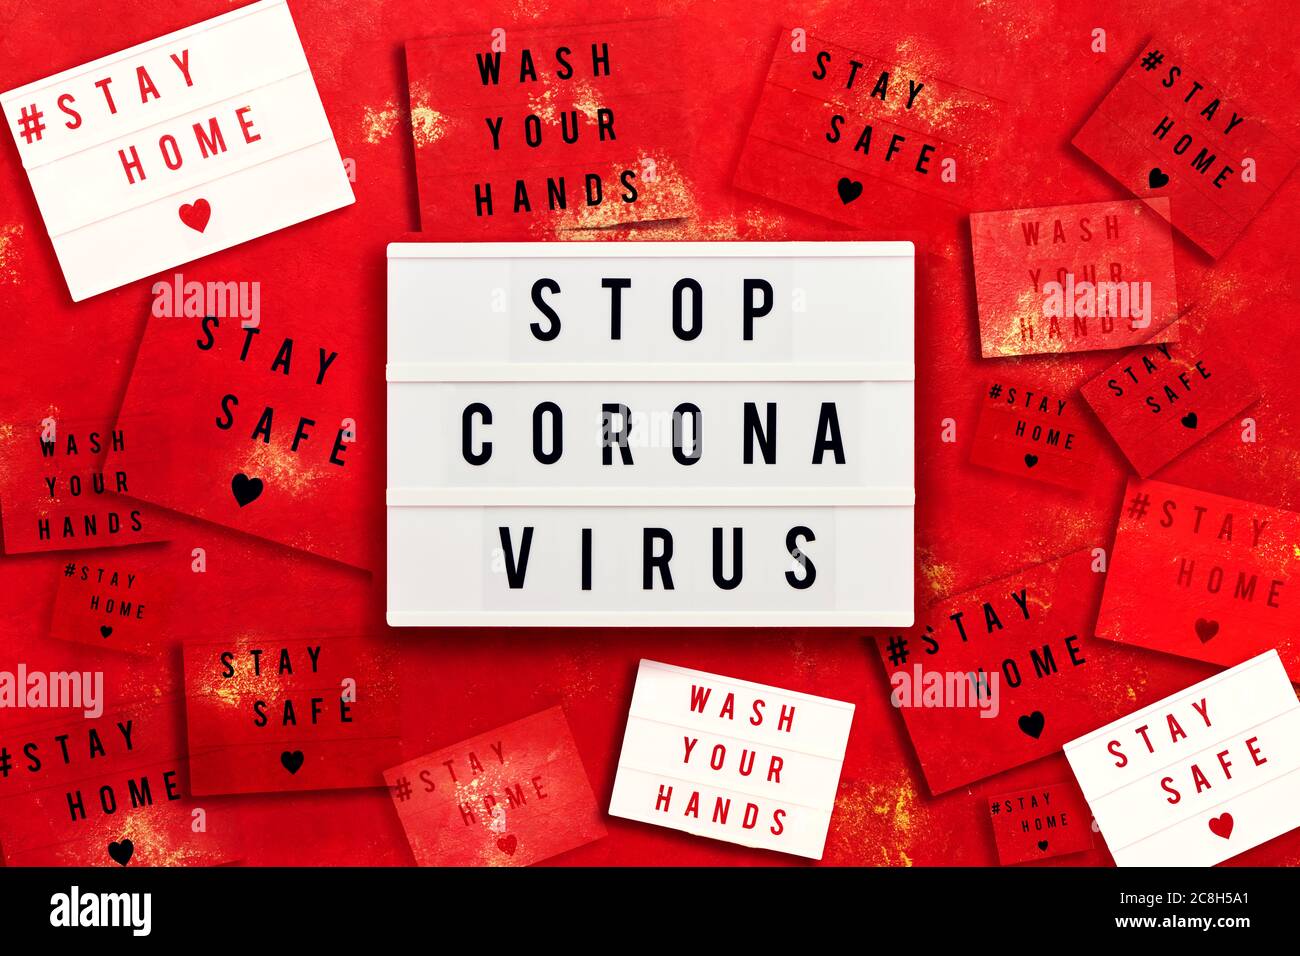 STOP CORONA VIRUS, STAY HOME, STAY SAFE and WAHS YOUR HANDS written in light box on red background. Healthcare and medical concept. Top view. Quaranti Stock Photo